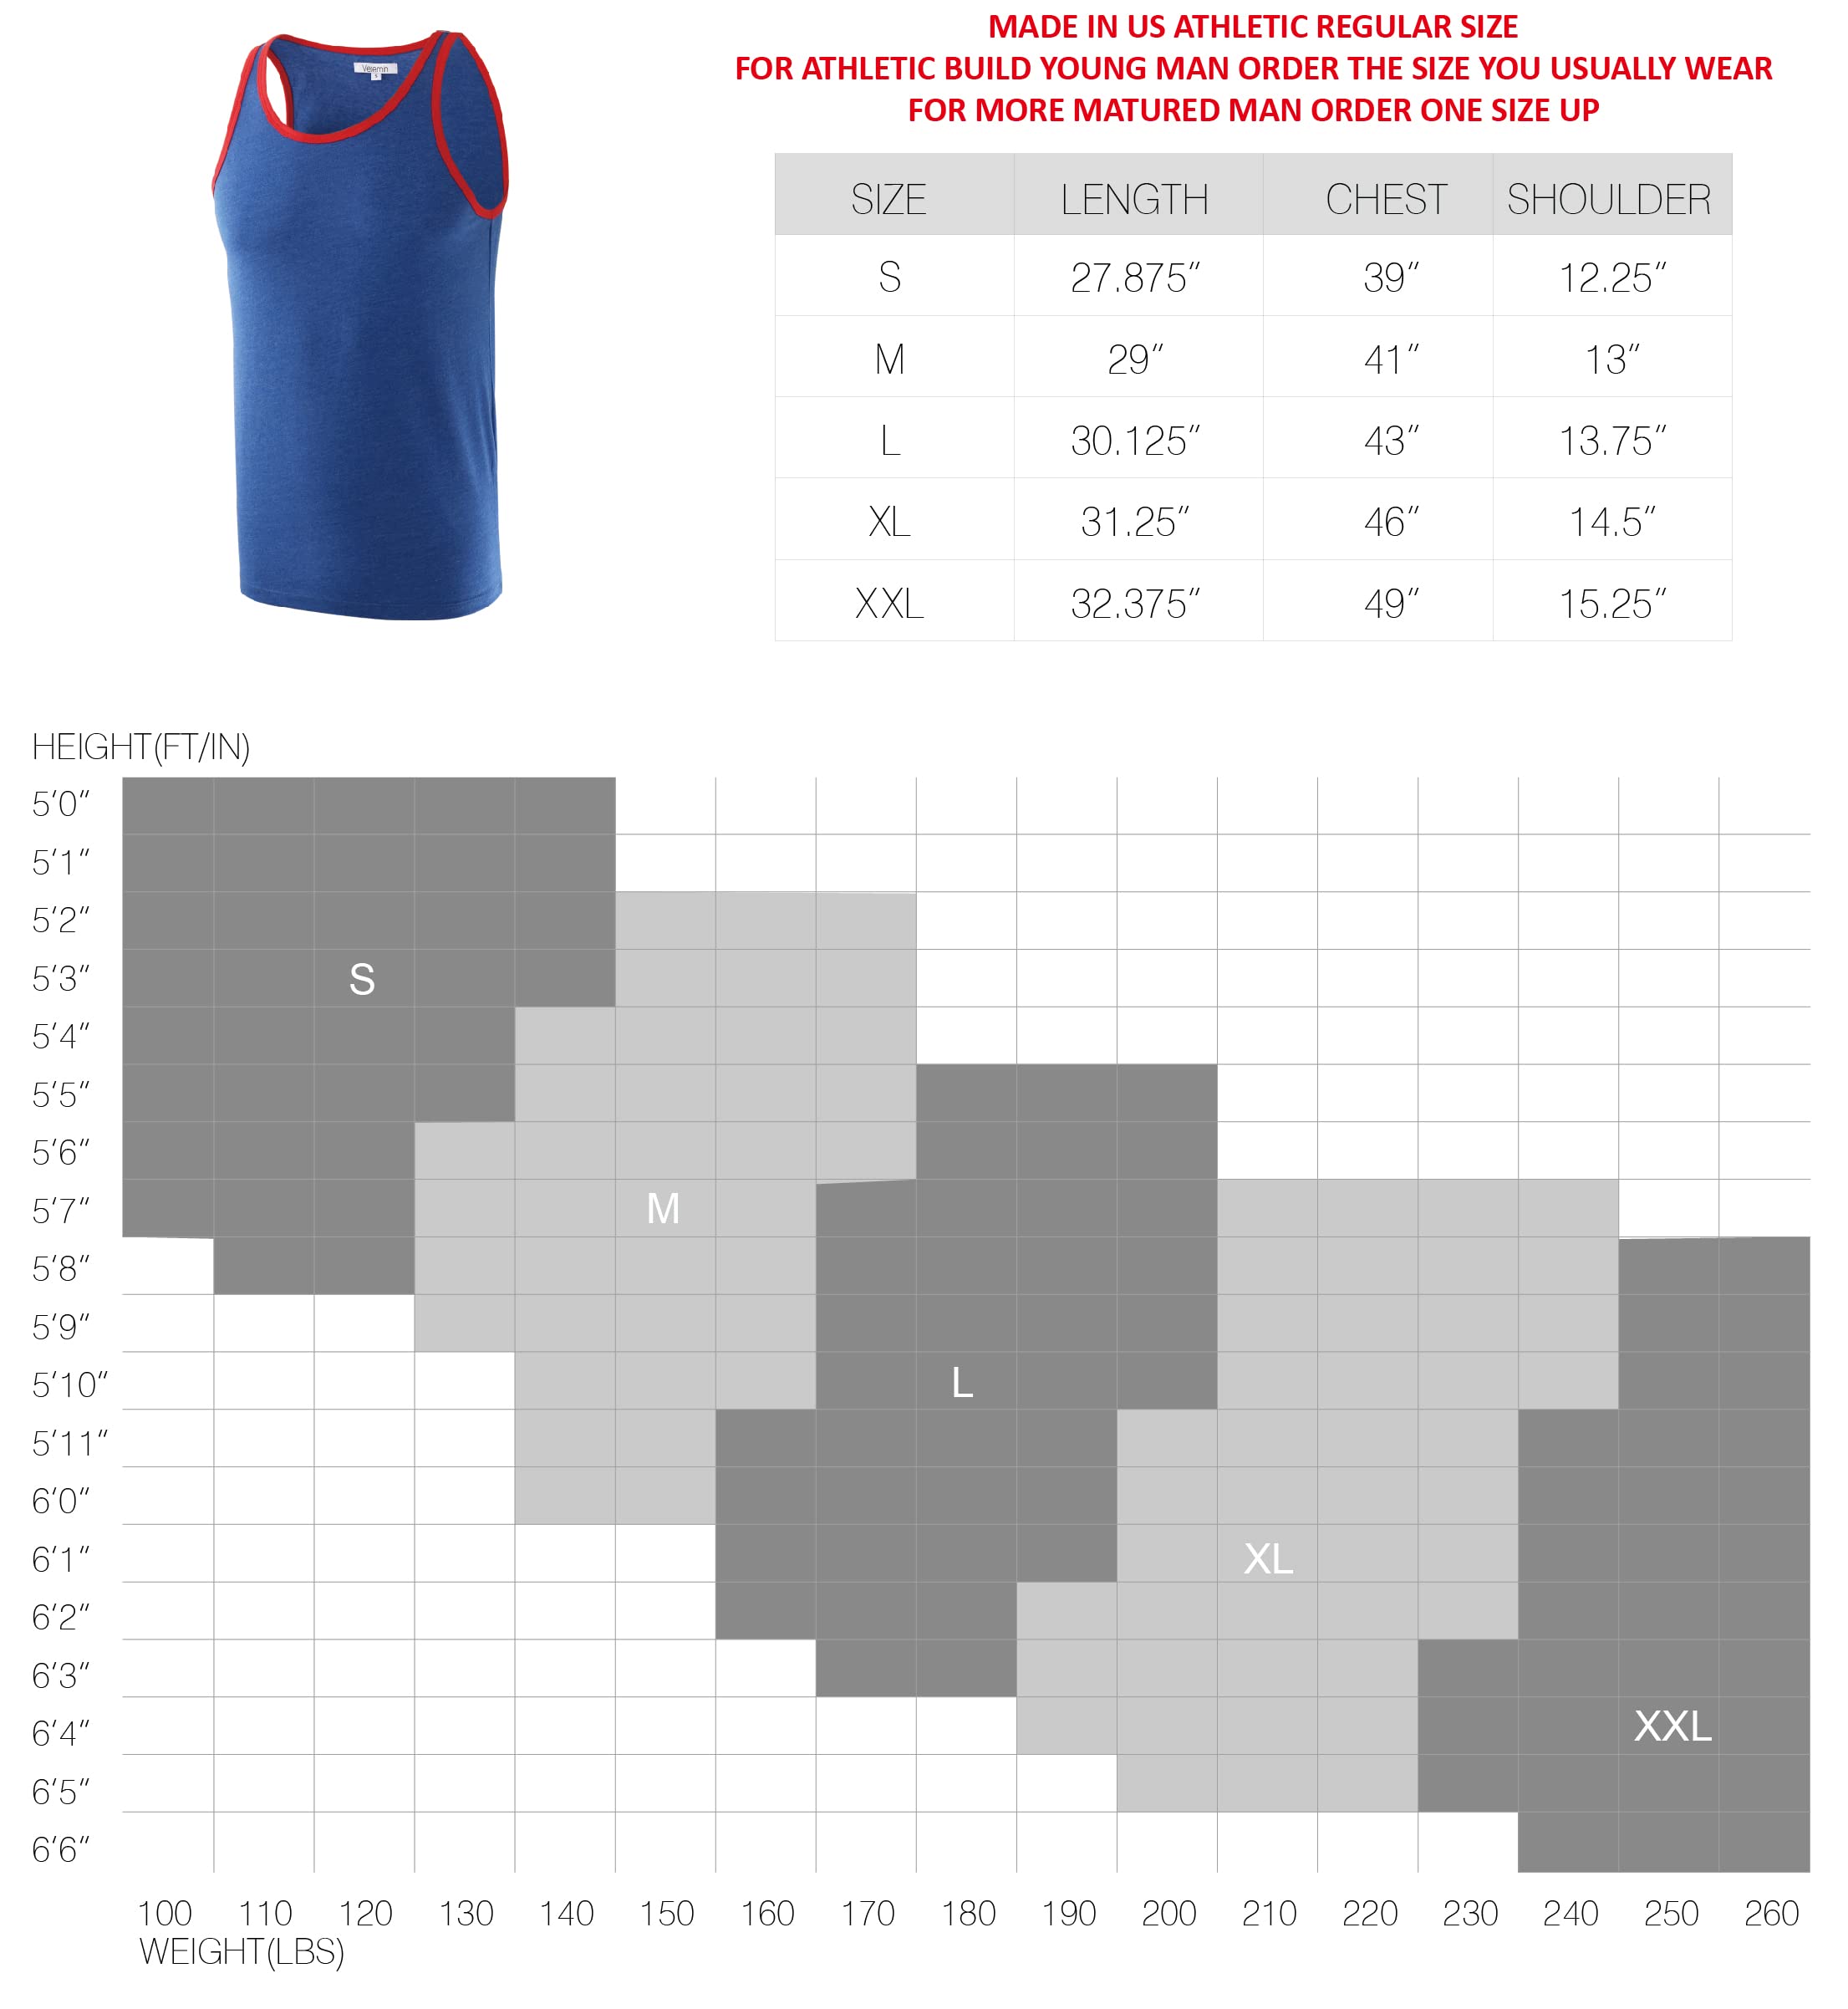 Vetemin Mens Premium Basic Solid Vintage Athletic Active Sports Jersey Tank Top Casual Shirts H.Oatmeal/Rusty XXL